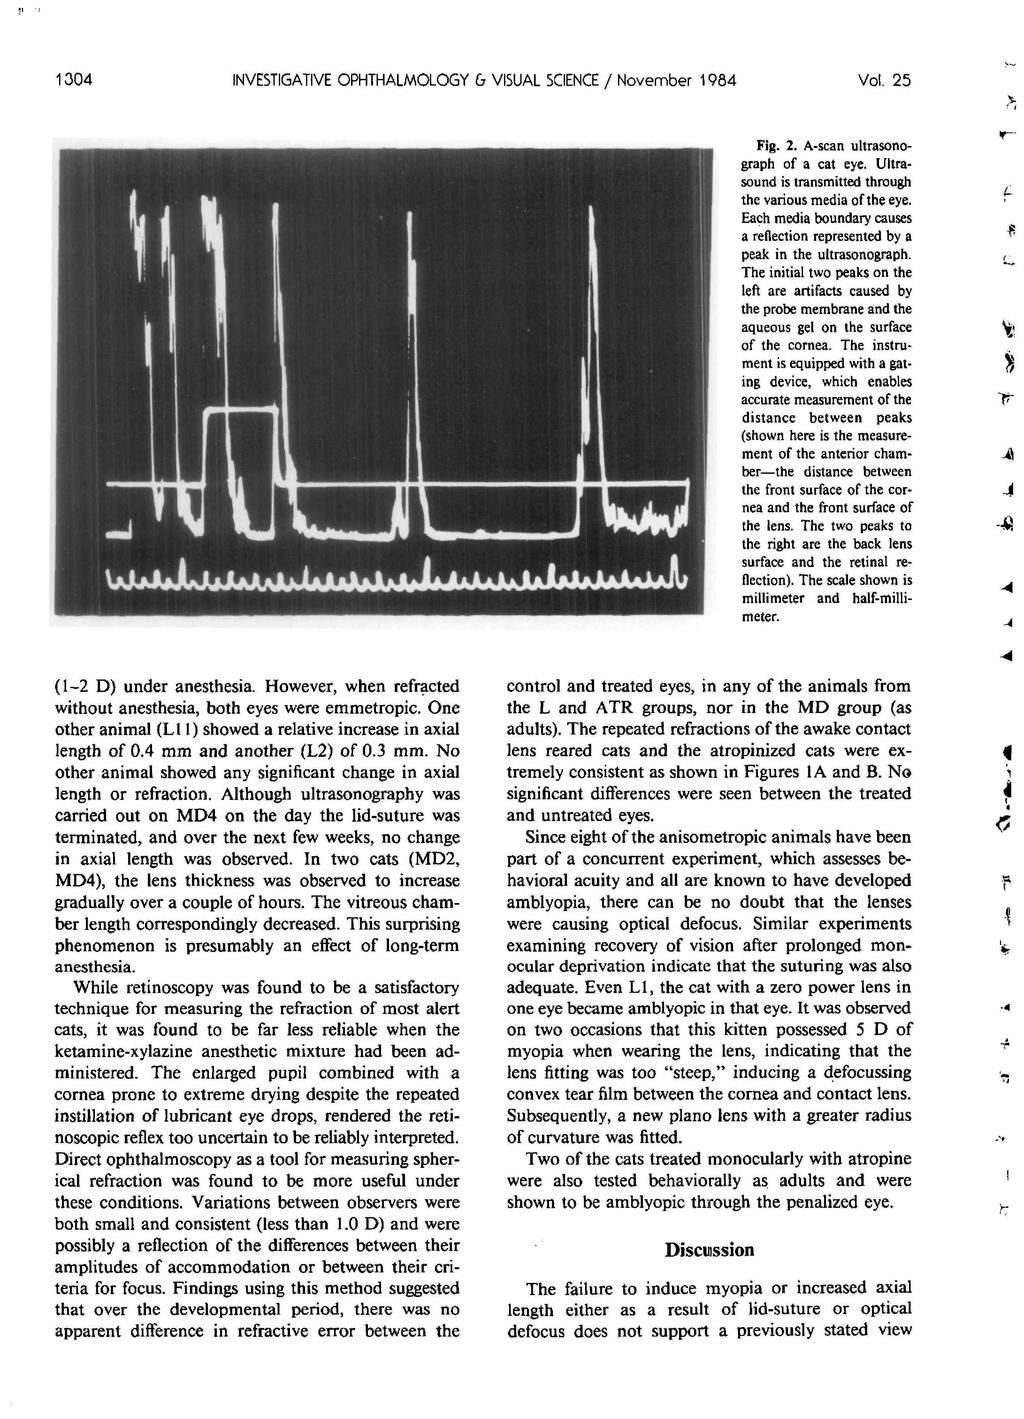 1304 INVESTIGATIVE OPHTHALMOLOGY G VISUAL SCIENCE / November 1984 Vol. 25 Fig. 2. A-scan ultrasonograph of a cat eye. Ultrasound is transmitted through the various media of the eye.